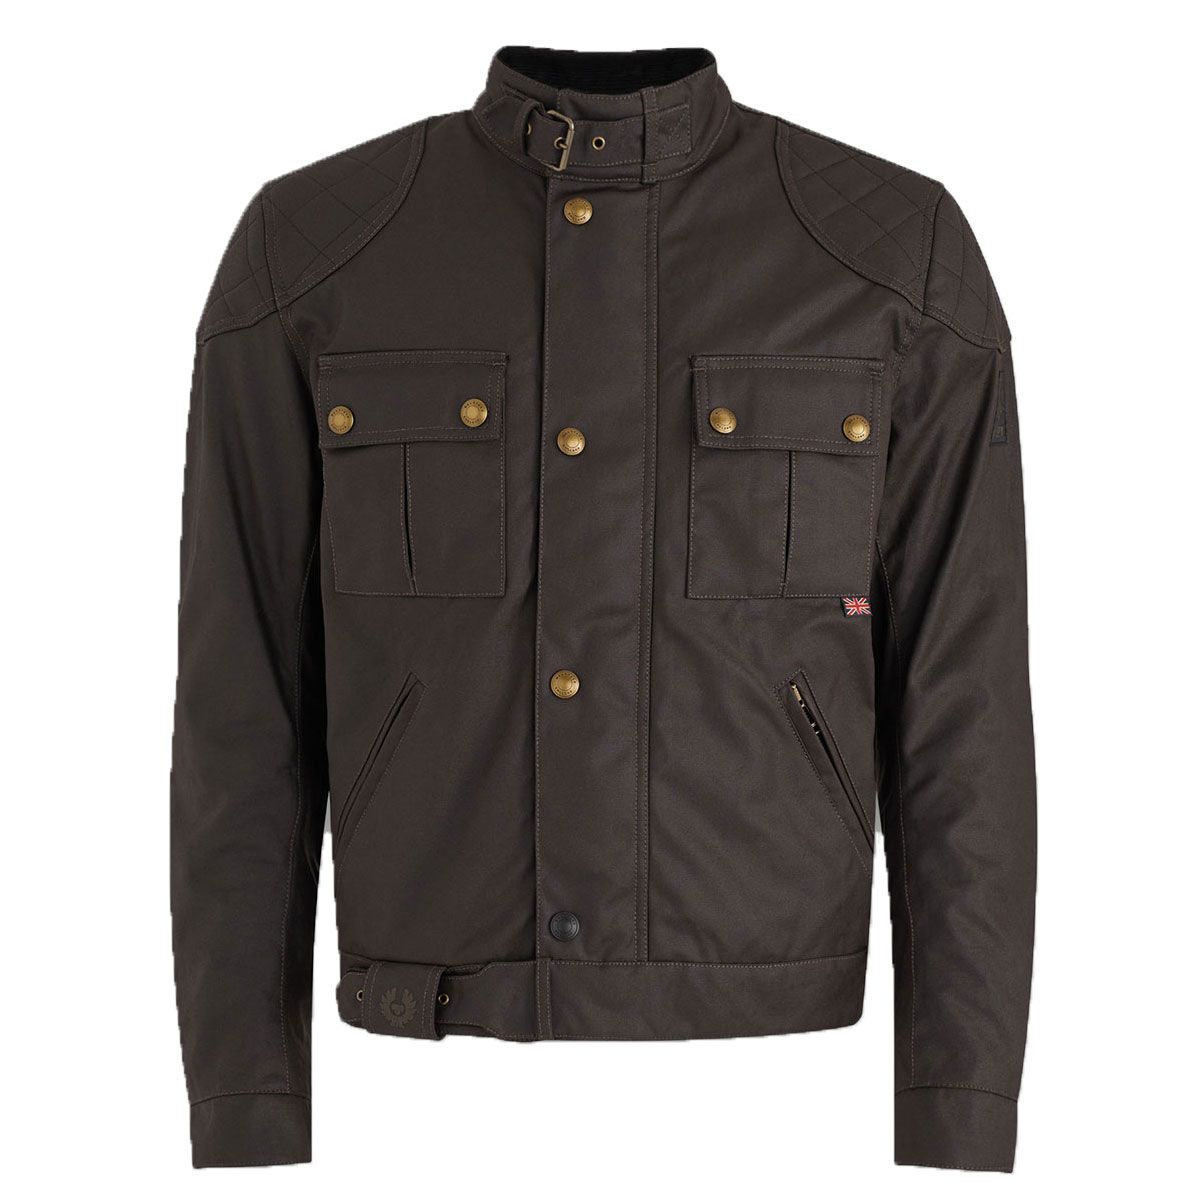 Belstaff Trialmaster Pro Leather Jacket Review - YouTube